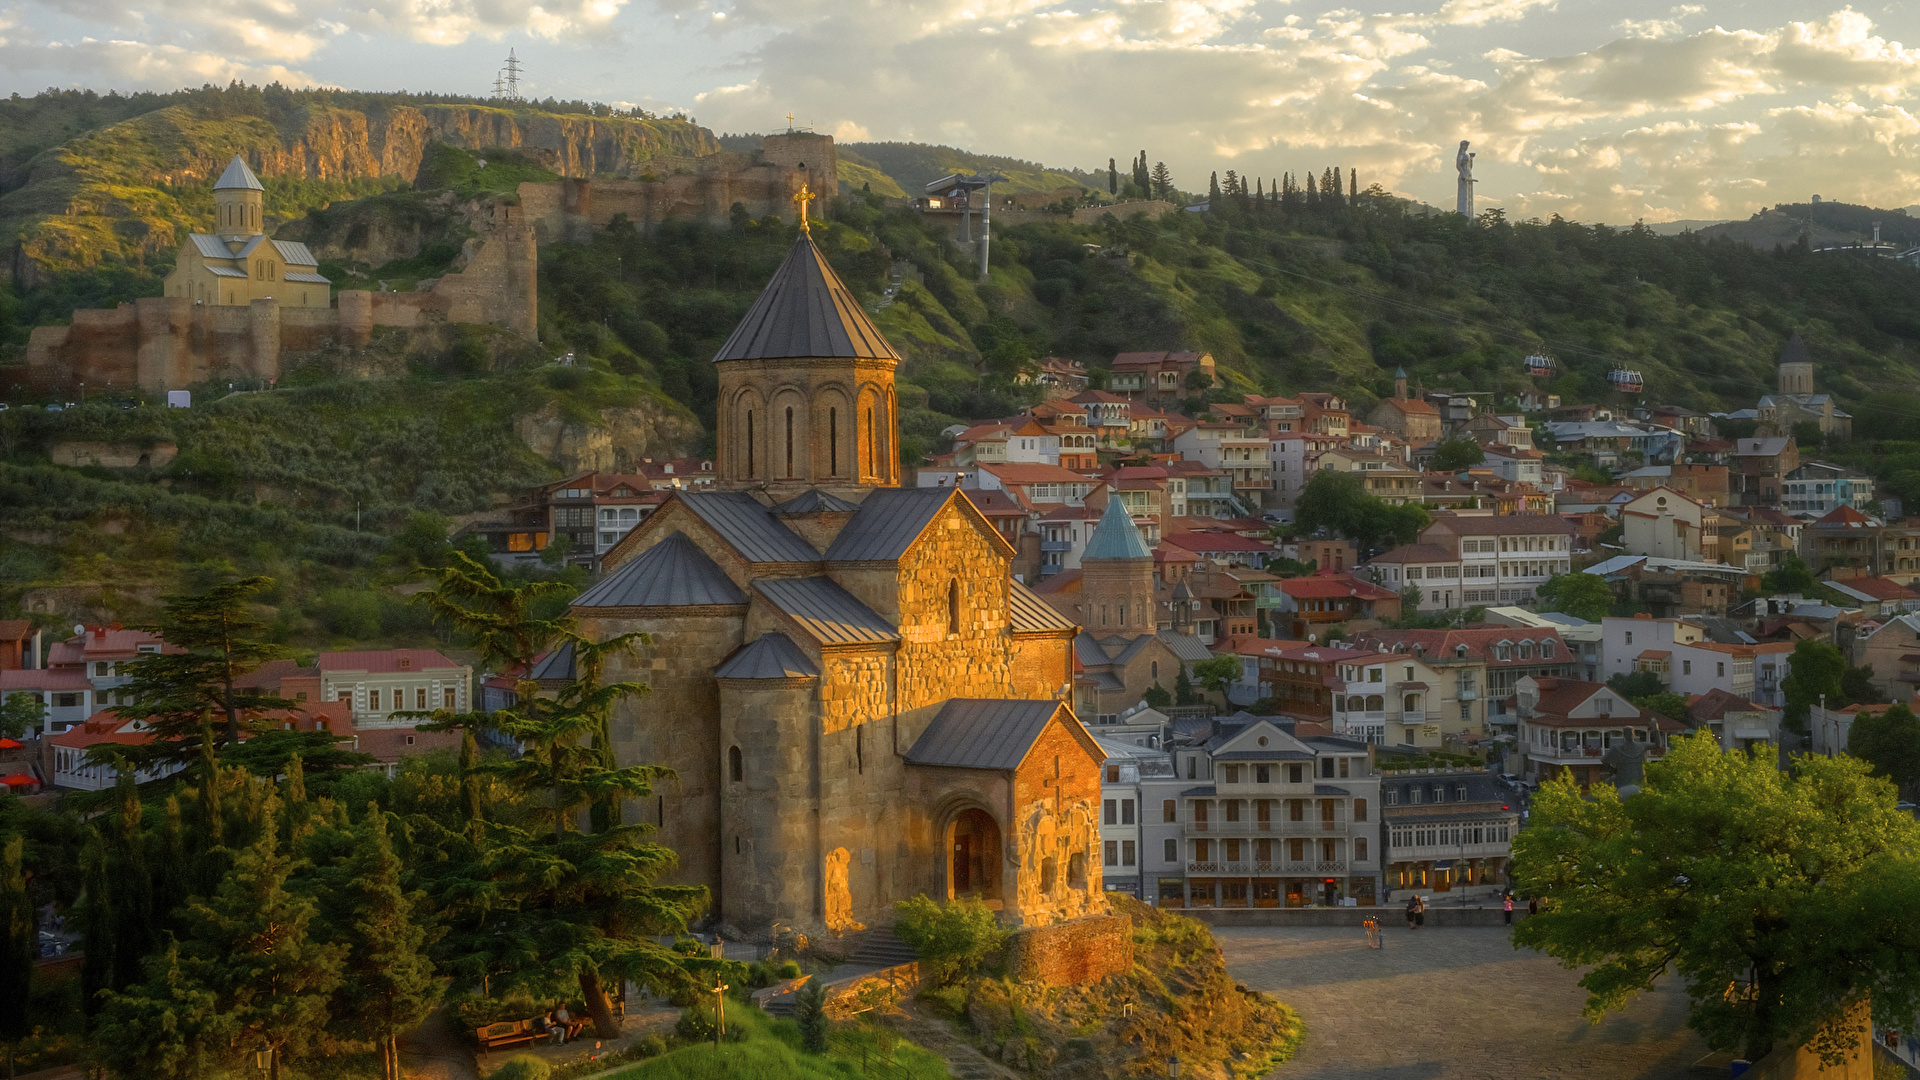 Premium Photo | Panoramic view of tbilisi, the capital of georgia with old  town and modern architecture.